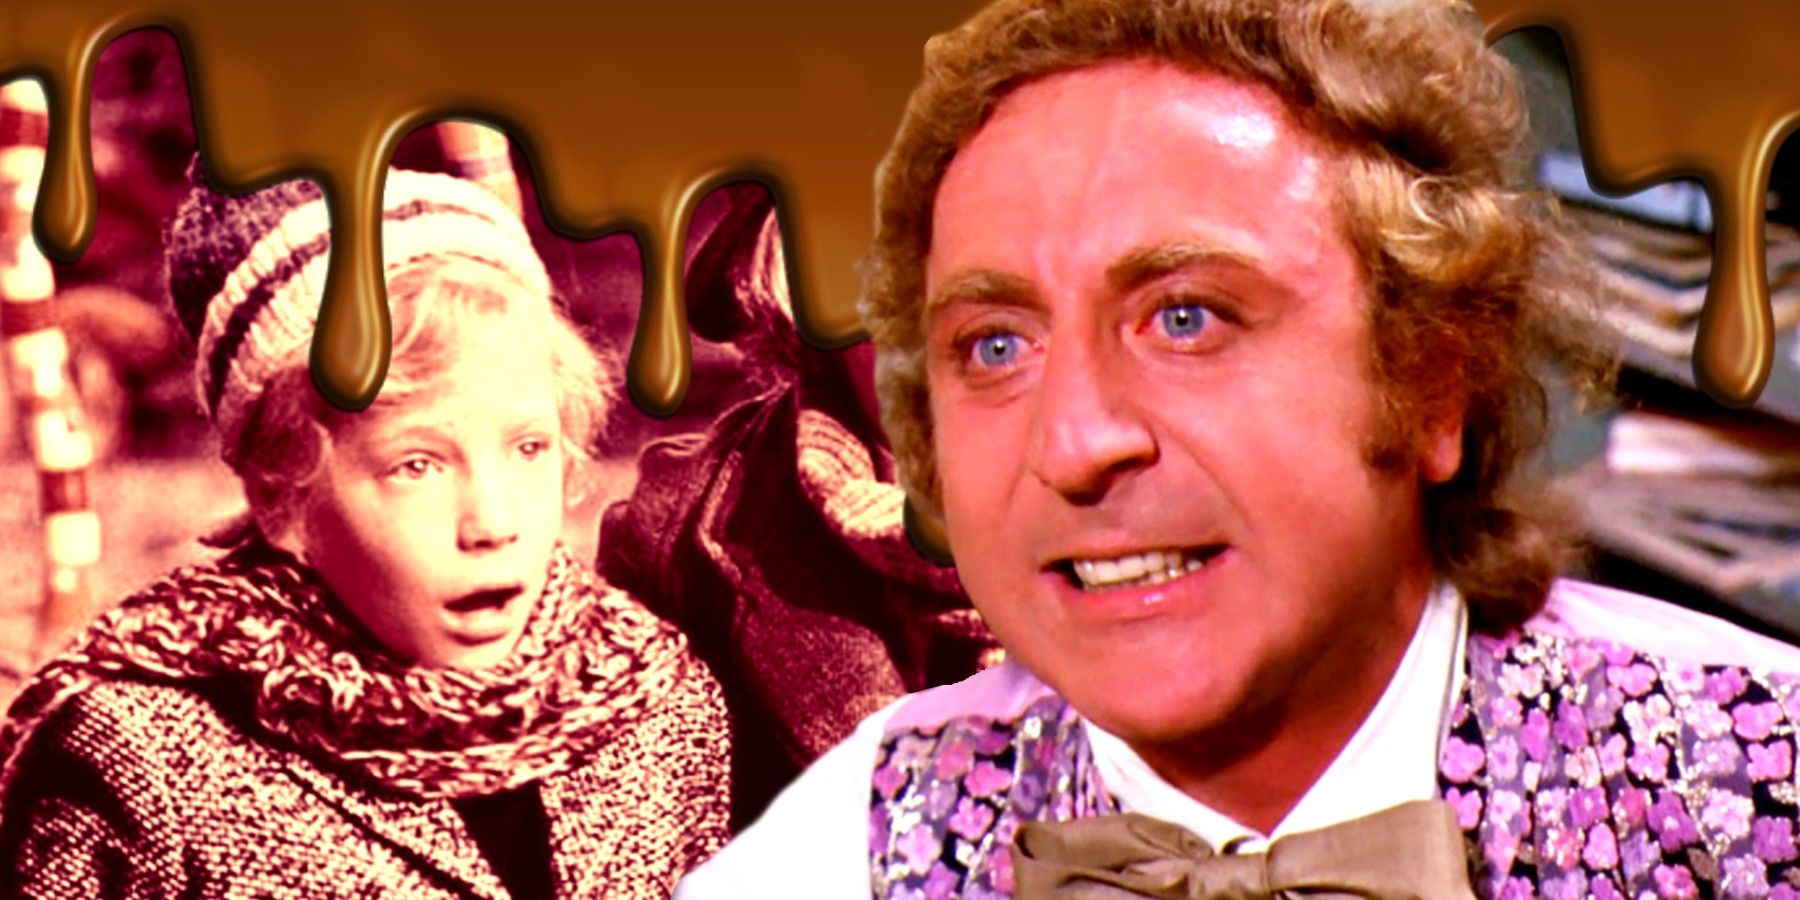 A blended image features Willy Wonka and Charlie in the original Charlie and the Chocolate Factory movie.